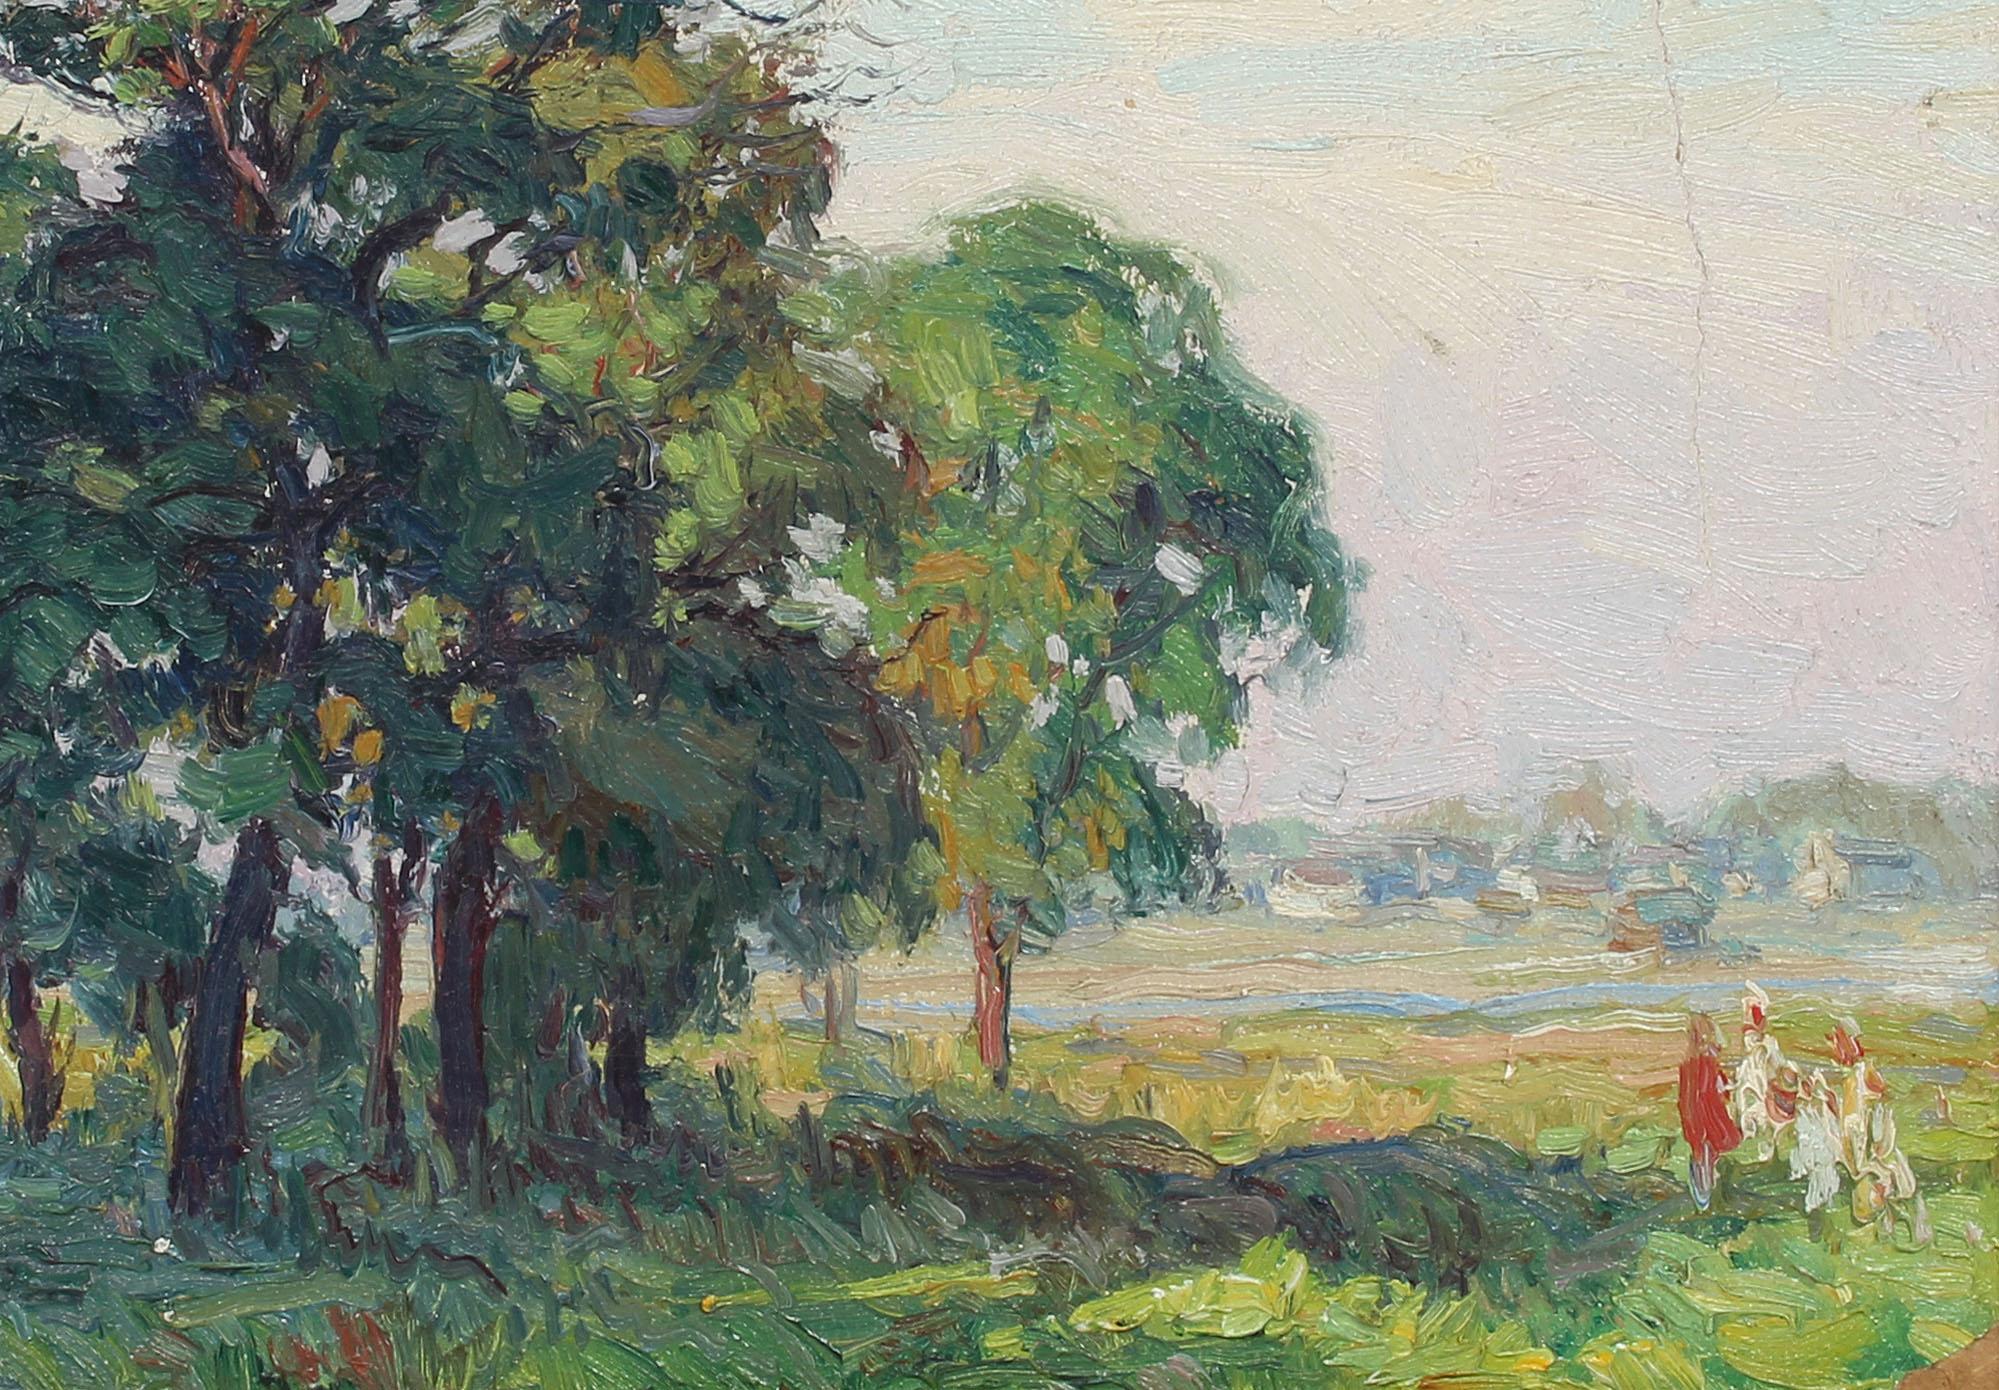 Antique impressionist oil painting of a Oak trees at Bergen Beach, NY by George A. Renouard (1885 - 1954).  Oil on board, circa 1927. Signed and titled on verso in pencil.  Displayed in a gold frame.  Image, 12